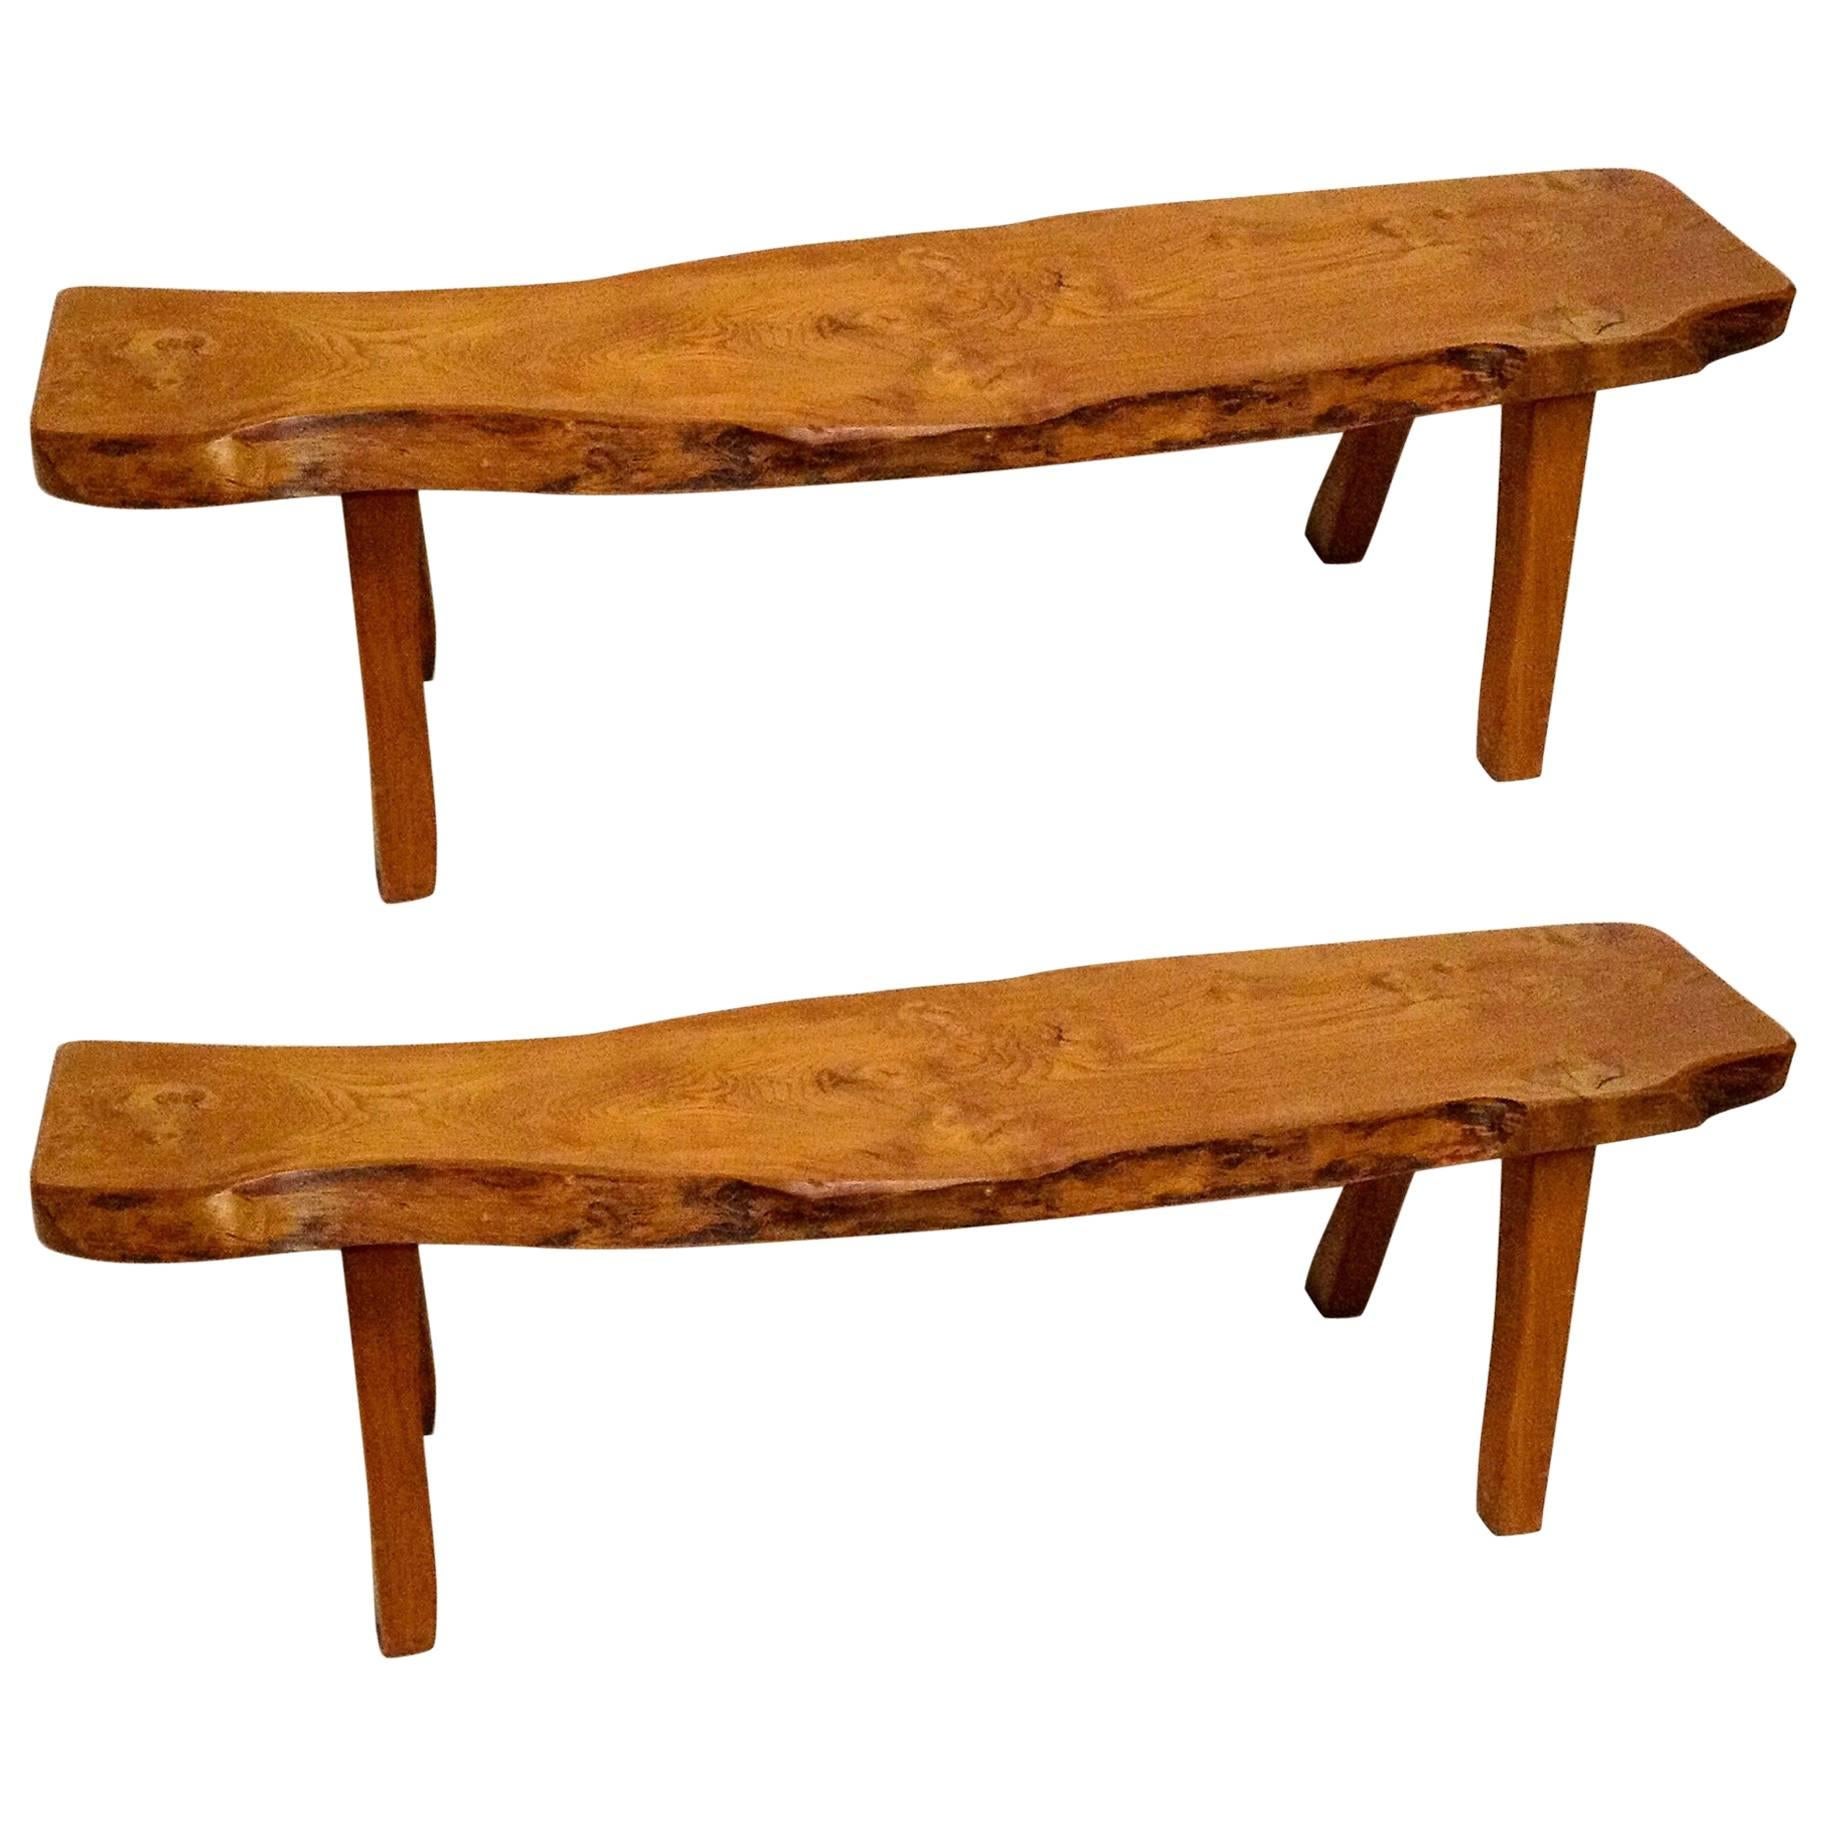 Finnish Wood Pair of Benches by Olavi Hänninen, First Edition, 1958 For Sale